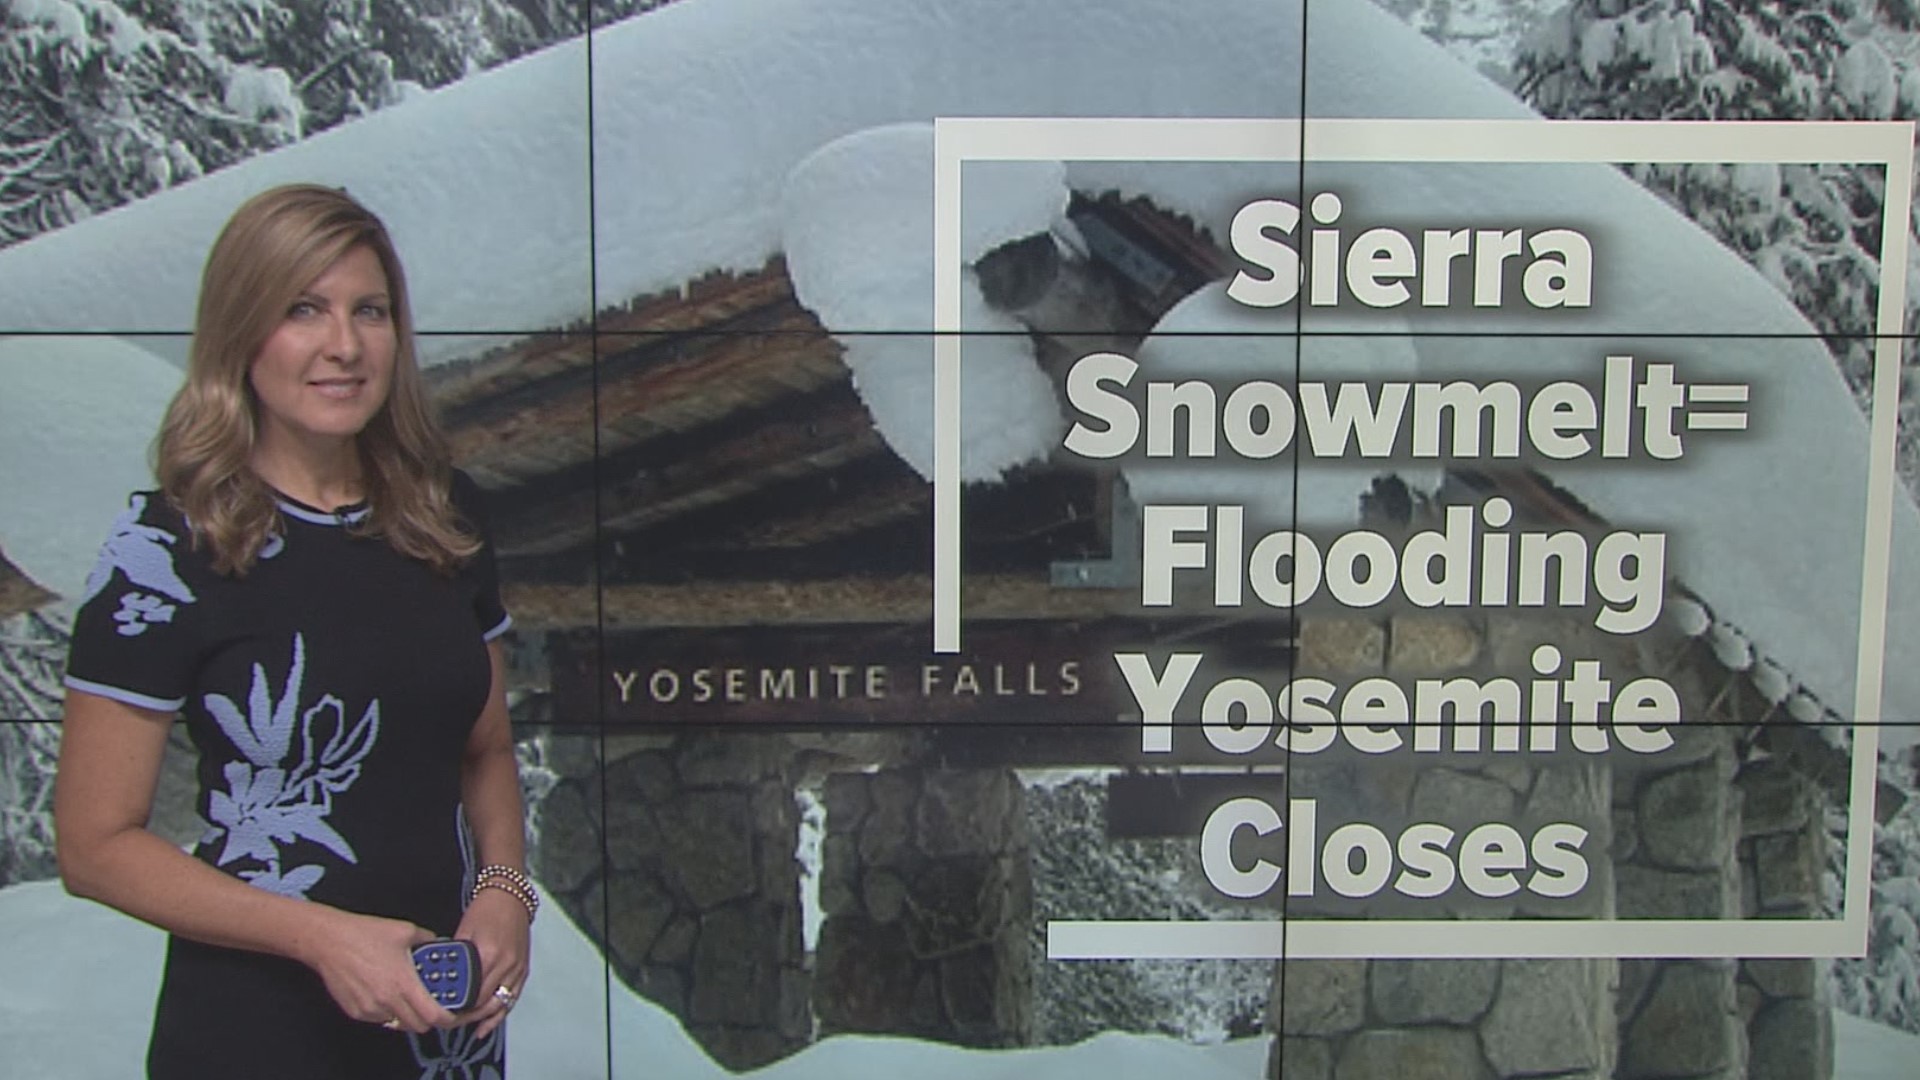 Melting Sierra snowpack, creating more flooding. Yosemite closing part of the park due to flood water risk and efforts continue to assist people throughout the state